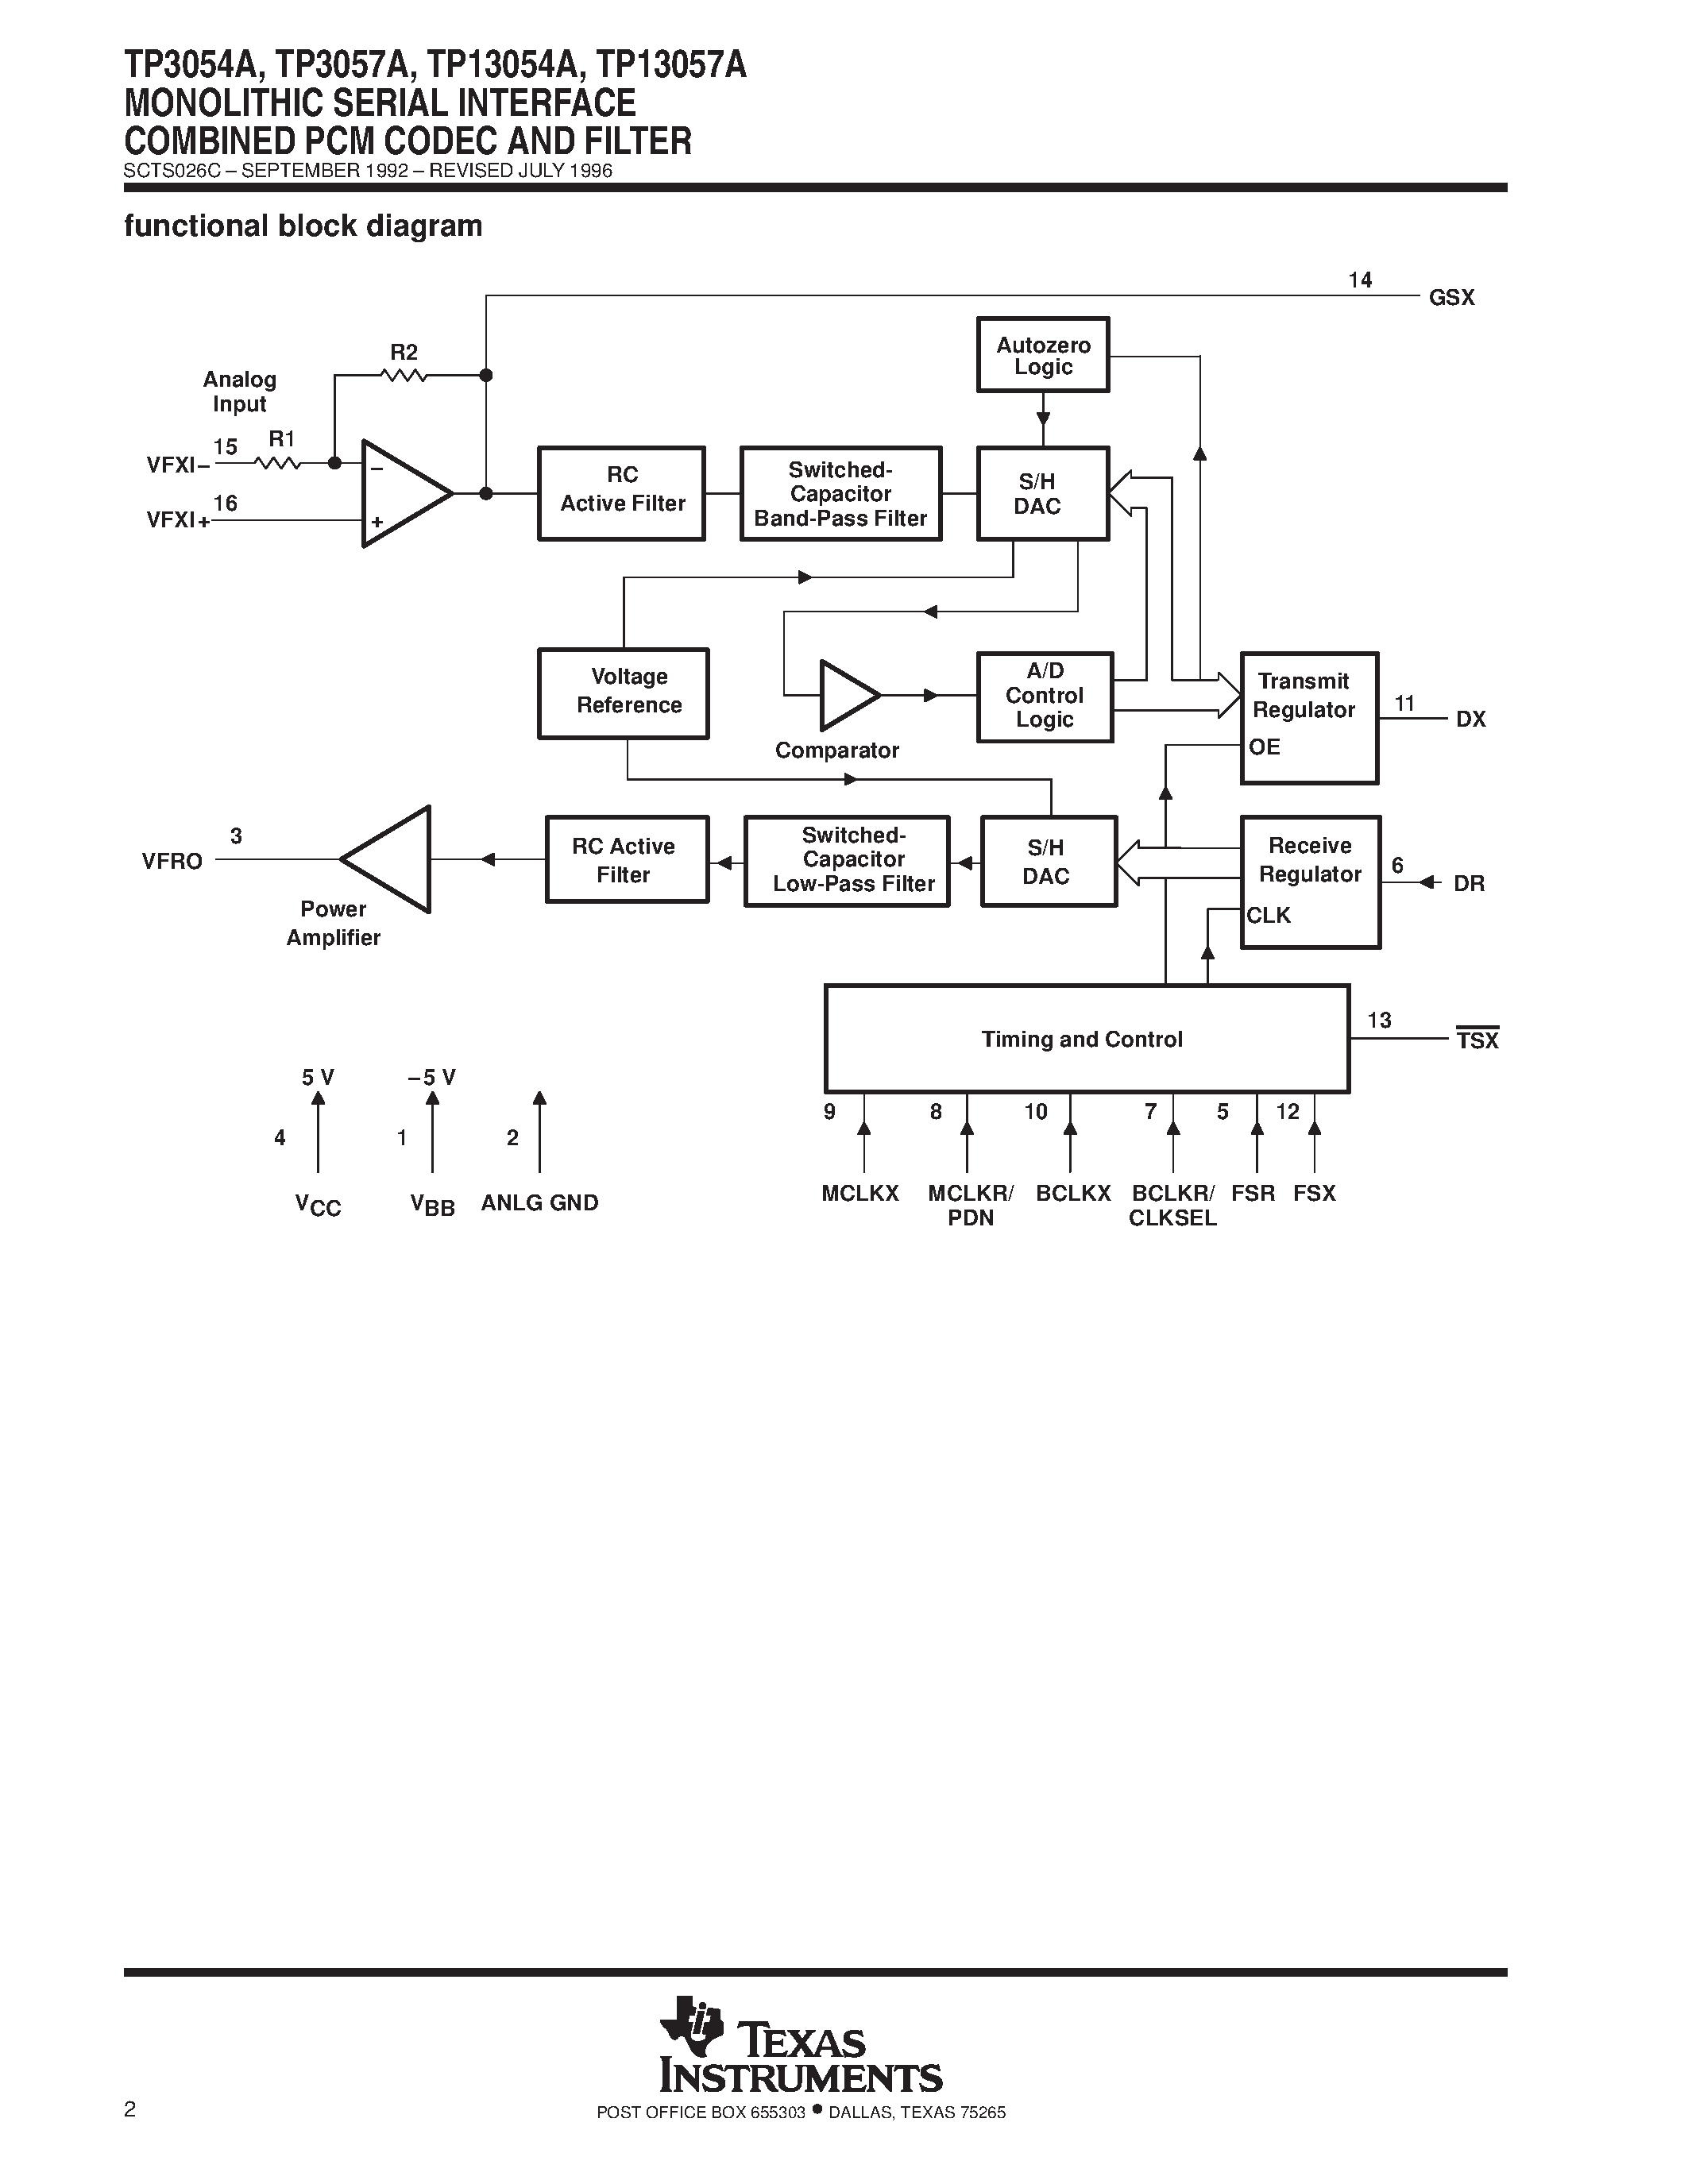 Datasheet TP13054AN - MONOLITHIC SERIAL INTERFACE COMBINED PCM CODEC AND FILTER page 2